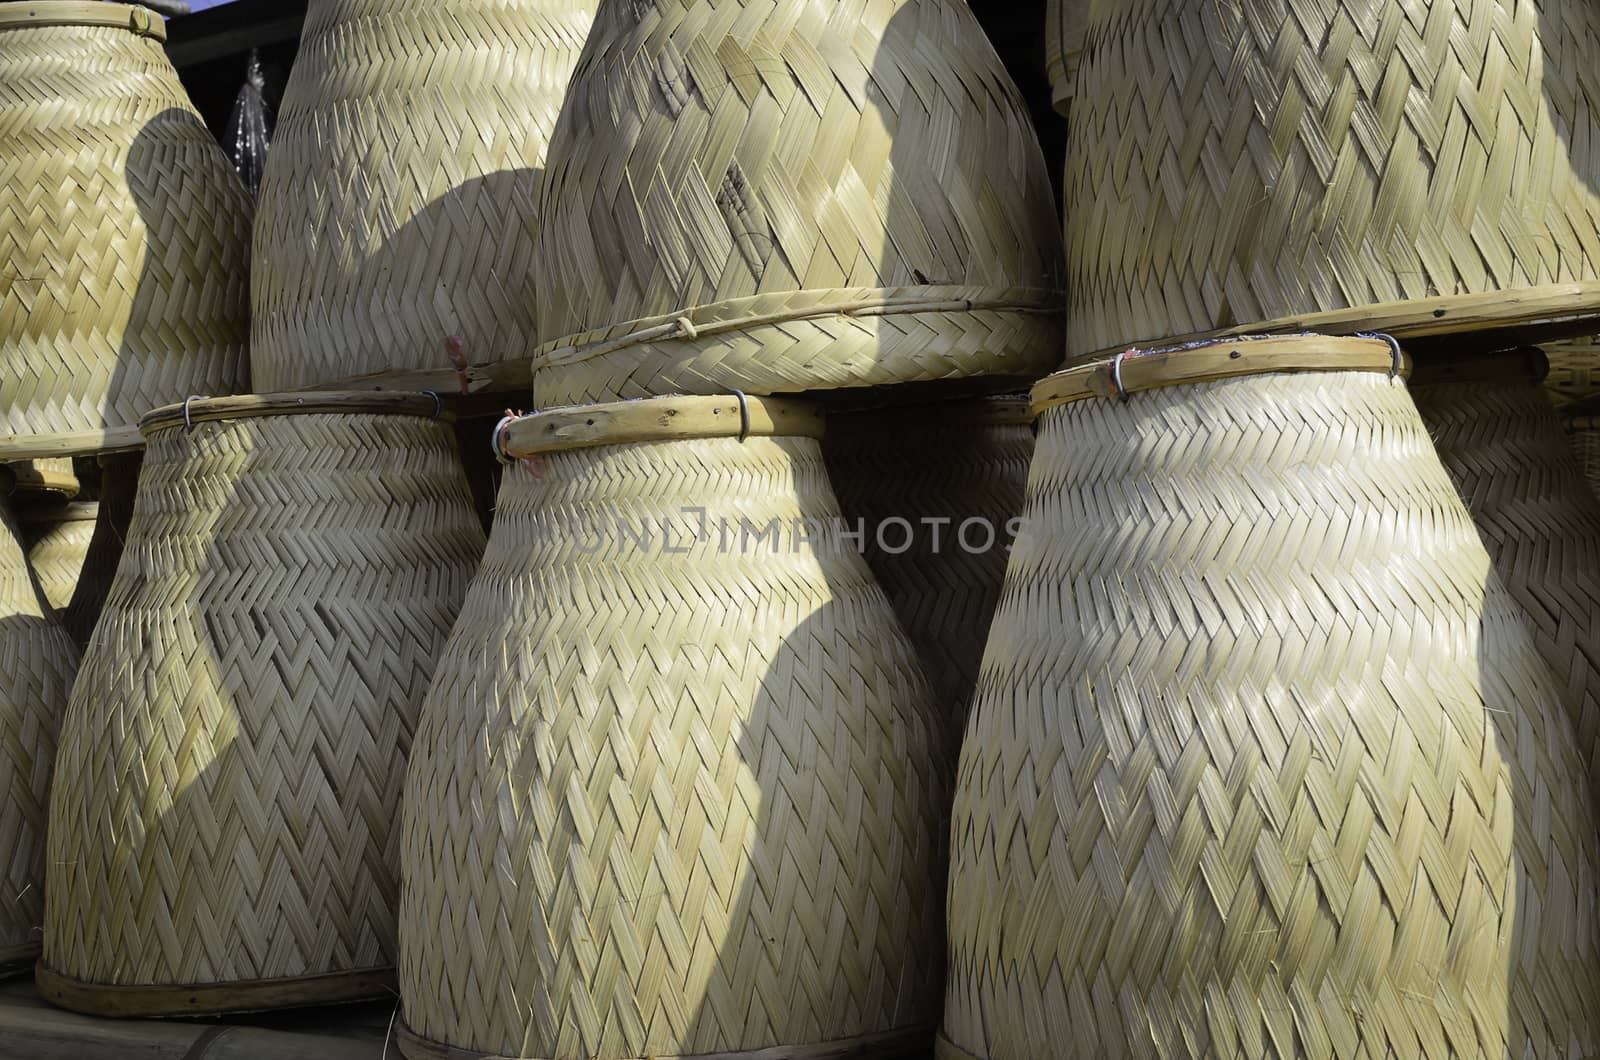 Handmade Bamboo basketwork for Sticky Rice Steaming by kobfujar